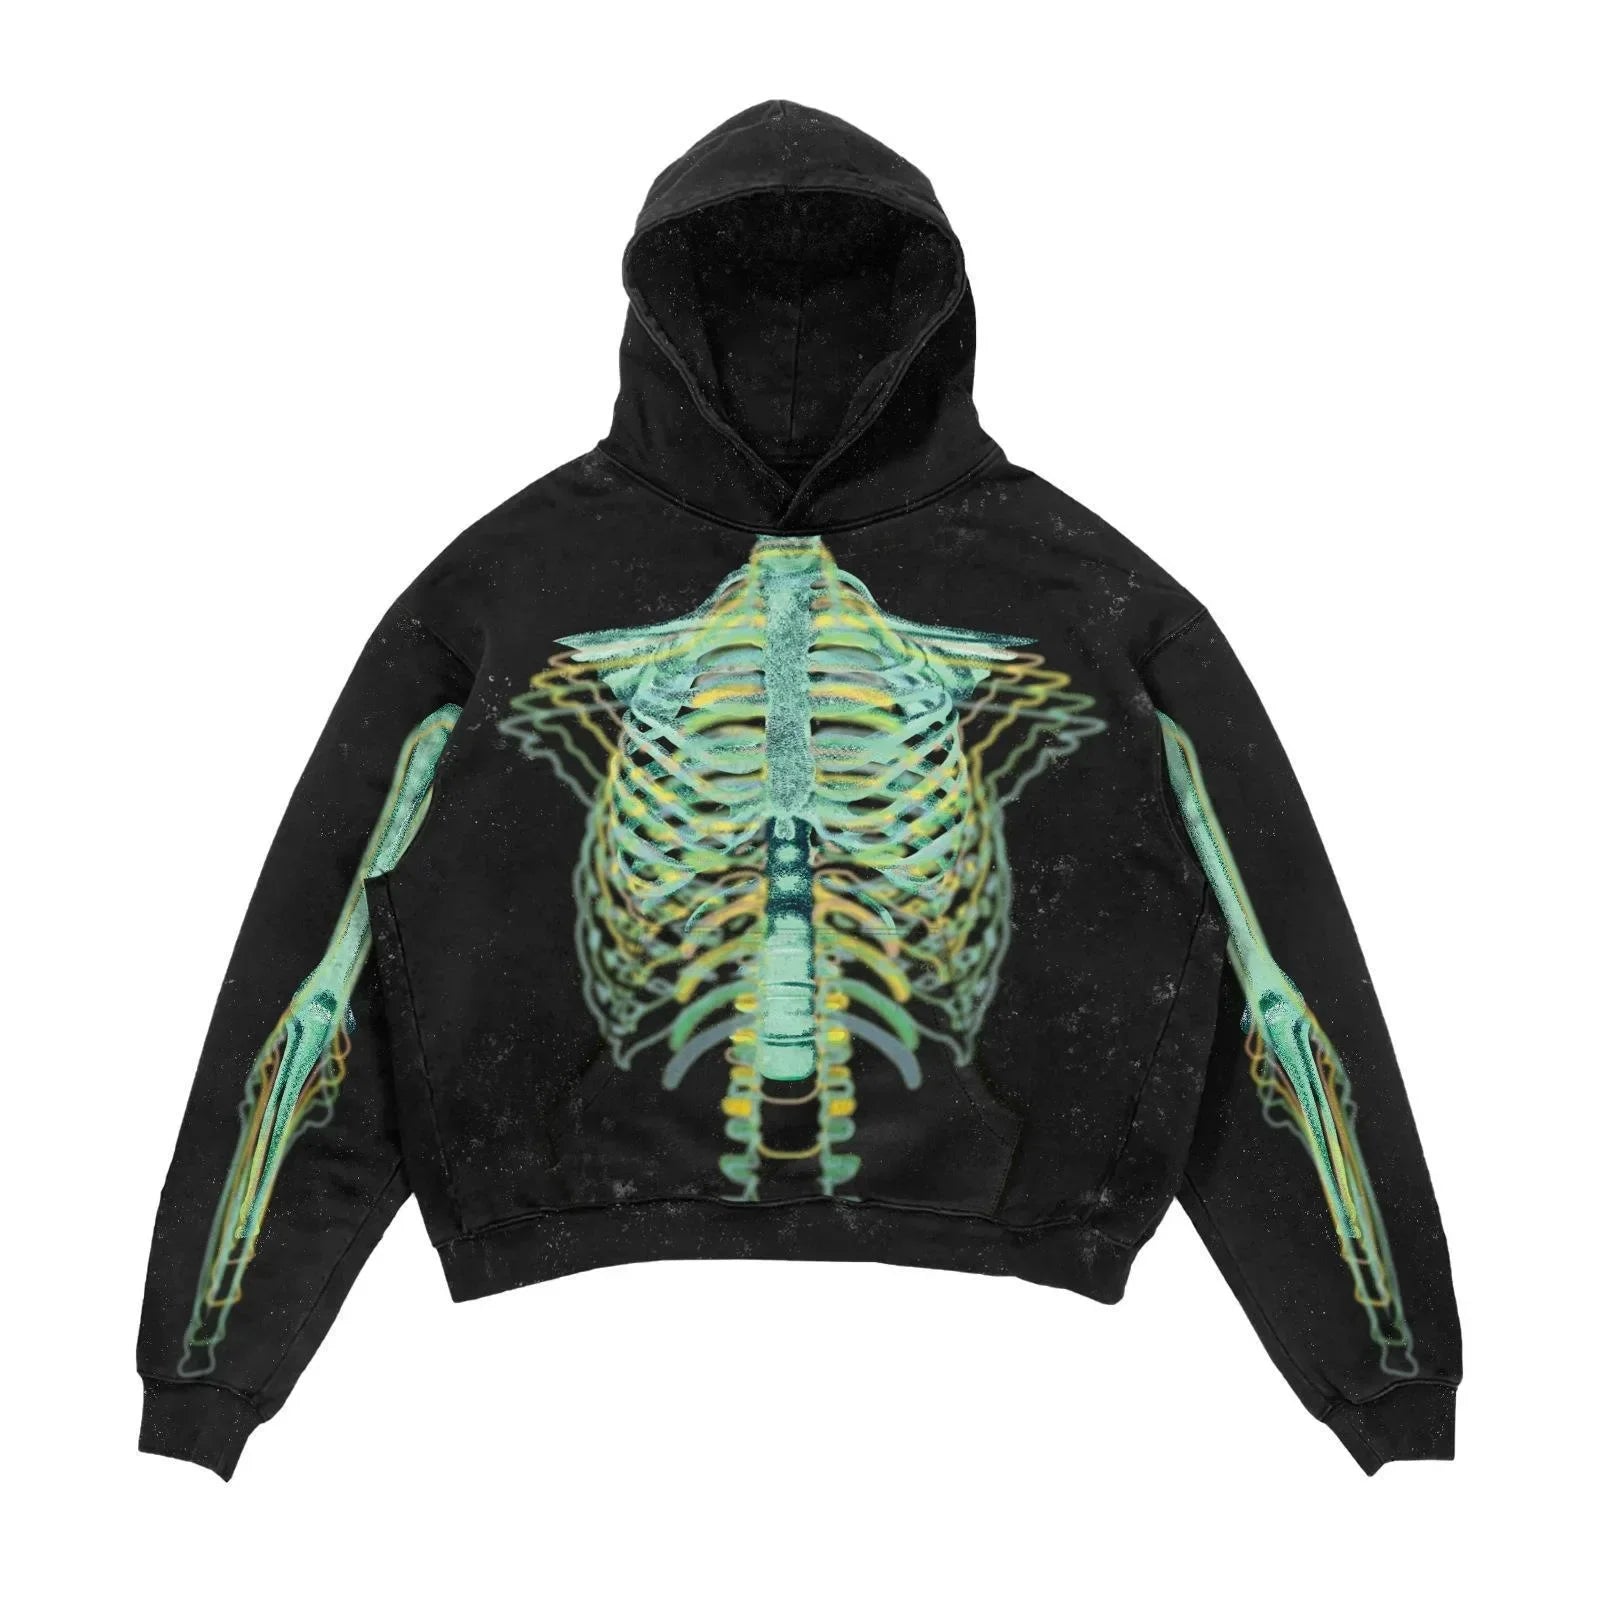 This black Maramalive™ Explosions Printed Skull Y2K Retro Hooded Sweater Coat Street Style Gothic Casual Fashion Hooded Sweater Men's Female, perfect for all Four Seasons, features a design of a neon green skeletal rib cage and arms on the front, giving it a distinct Punk Style edge.